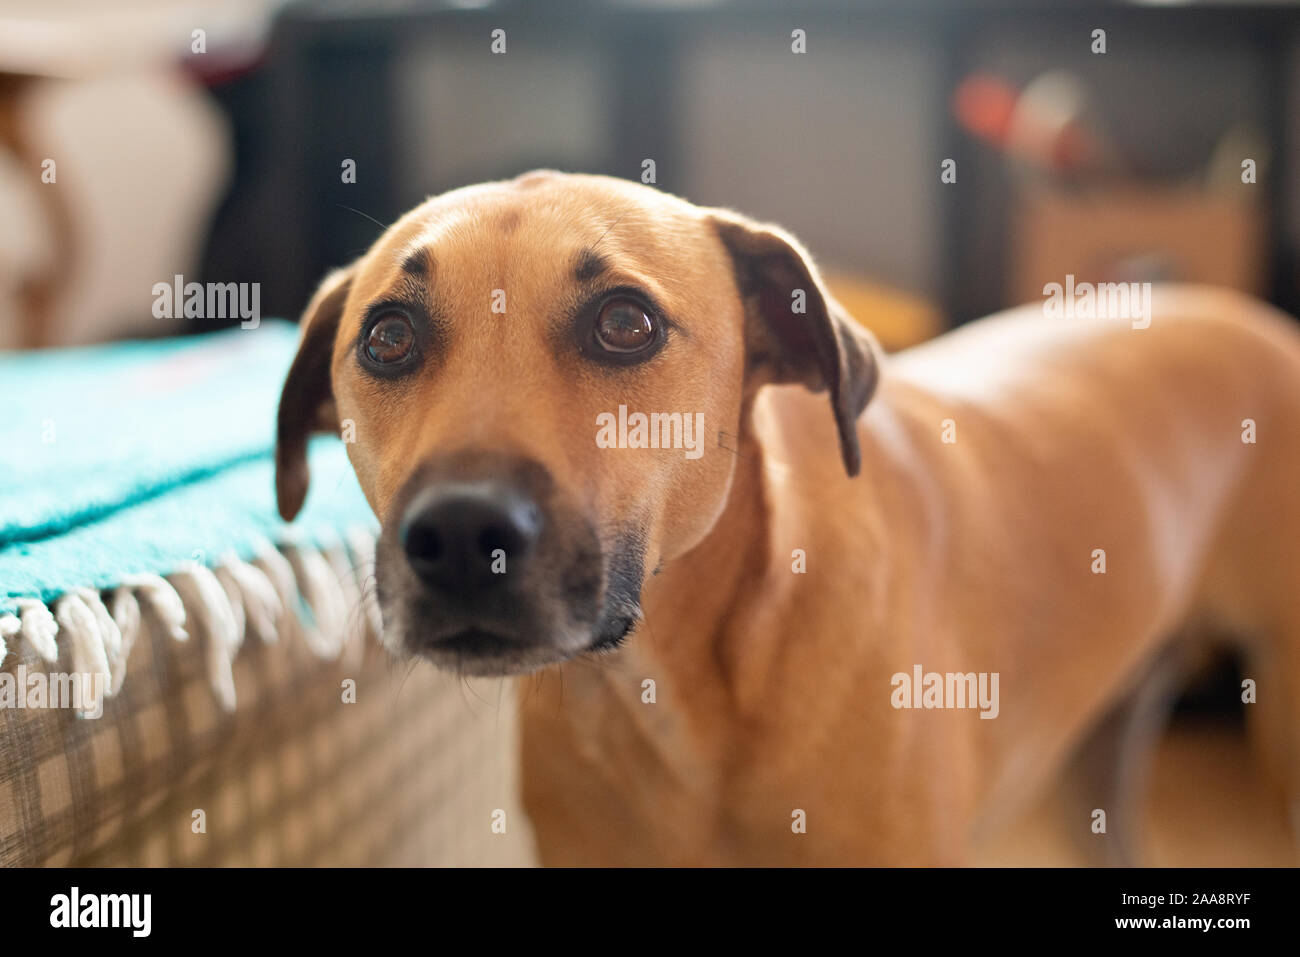 Sad, guilty looking dog with floppy ears and big brown puppy dog eyes Stock Photo